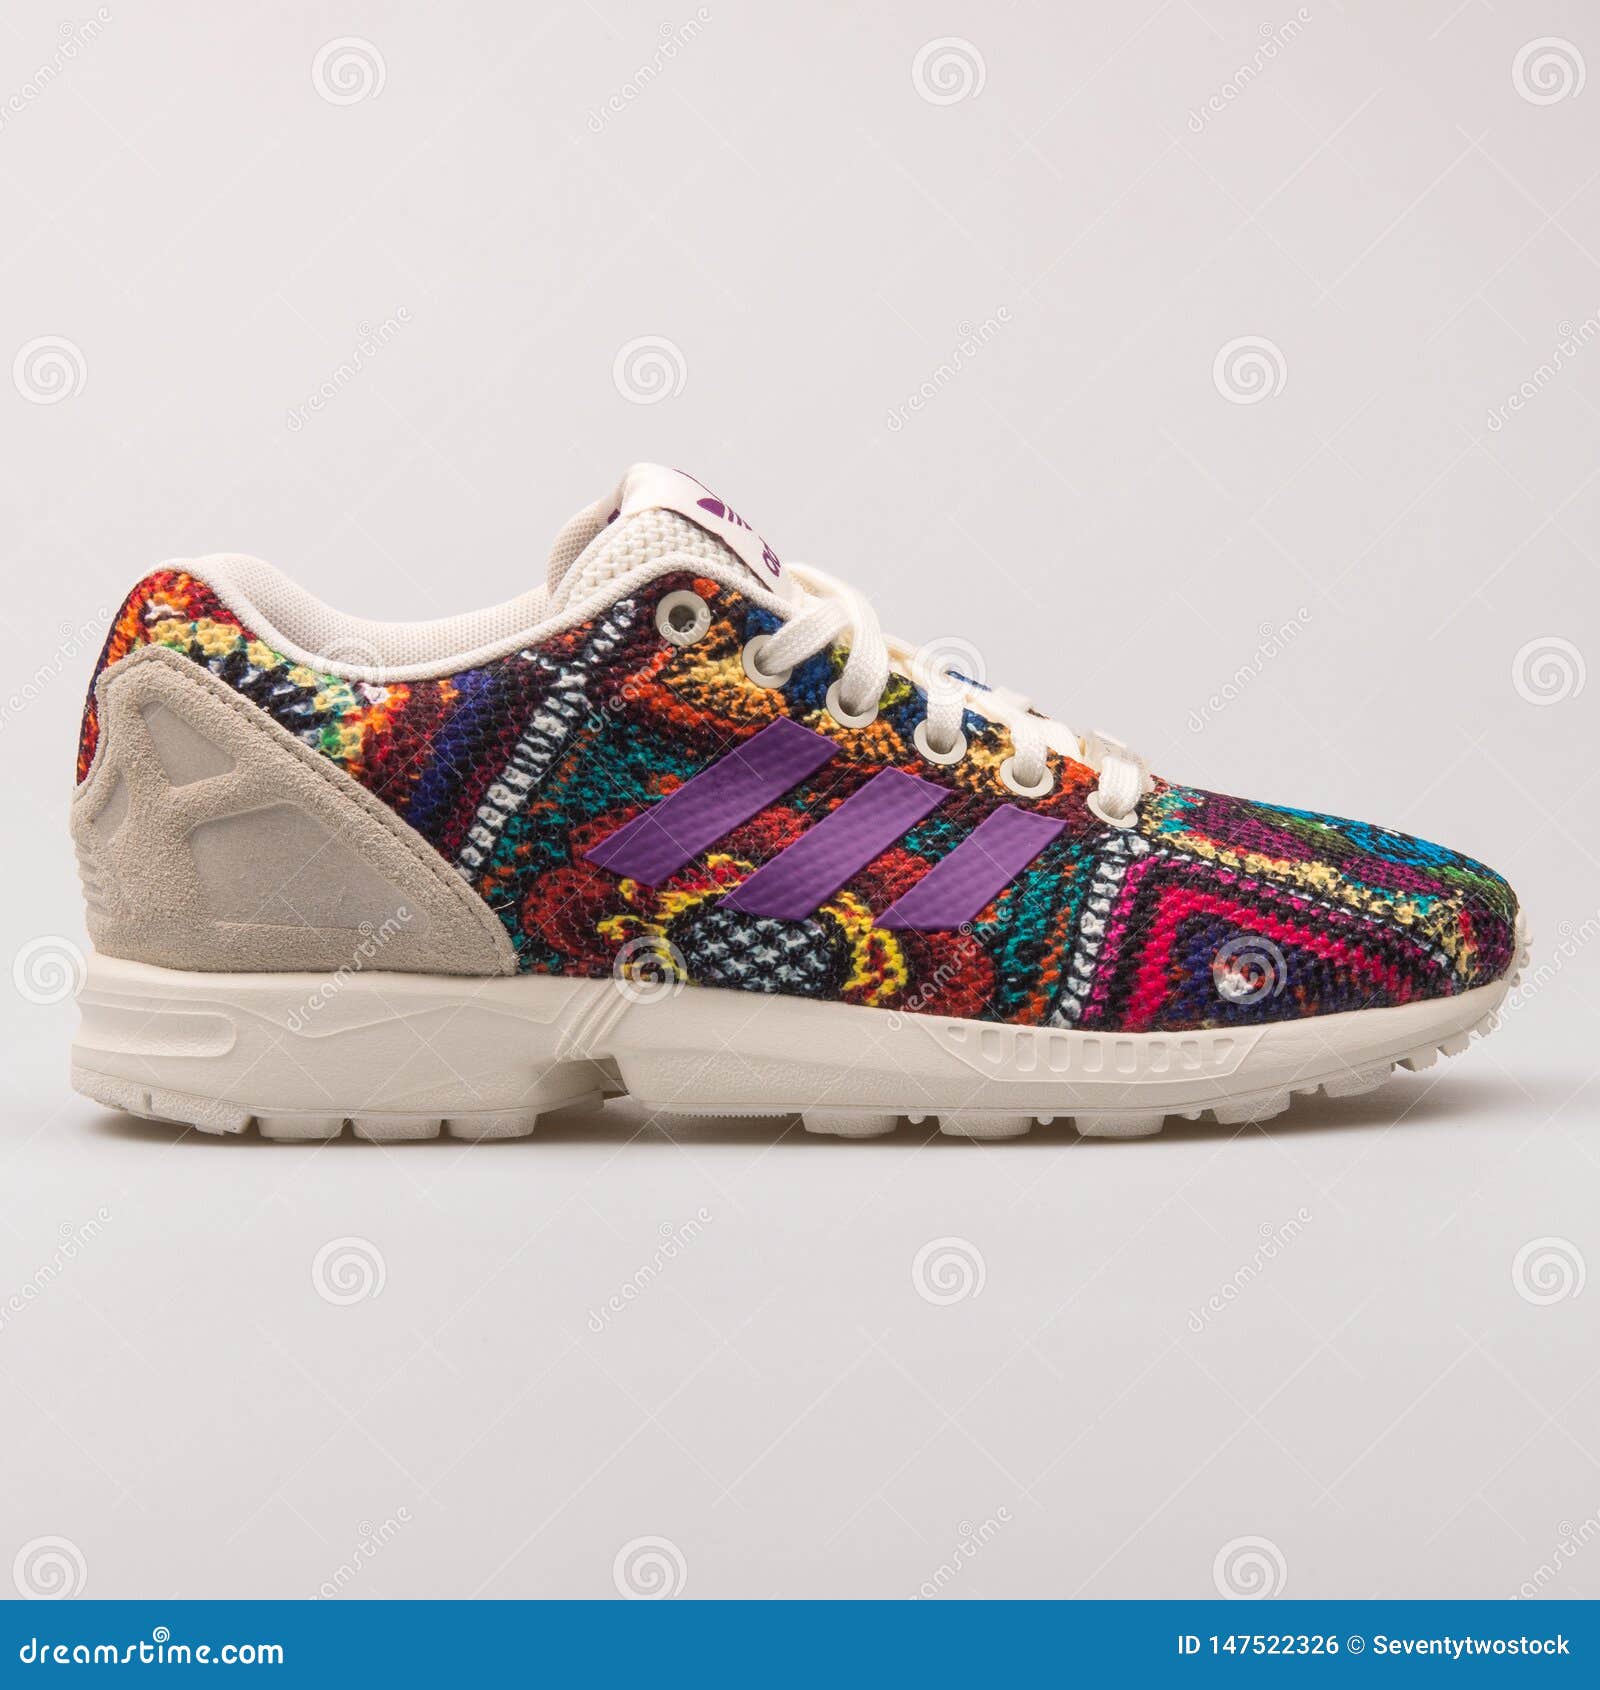 Adidas ZX Flux Multi Color Sneaker Editorial Photo - Image of fitness,  product: 147522326